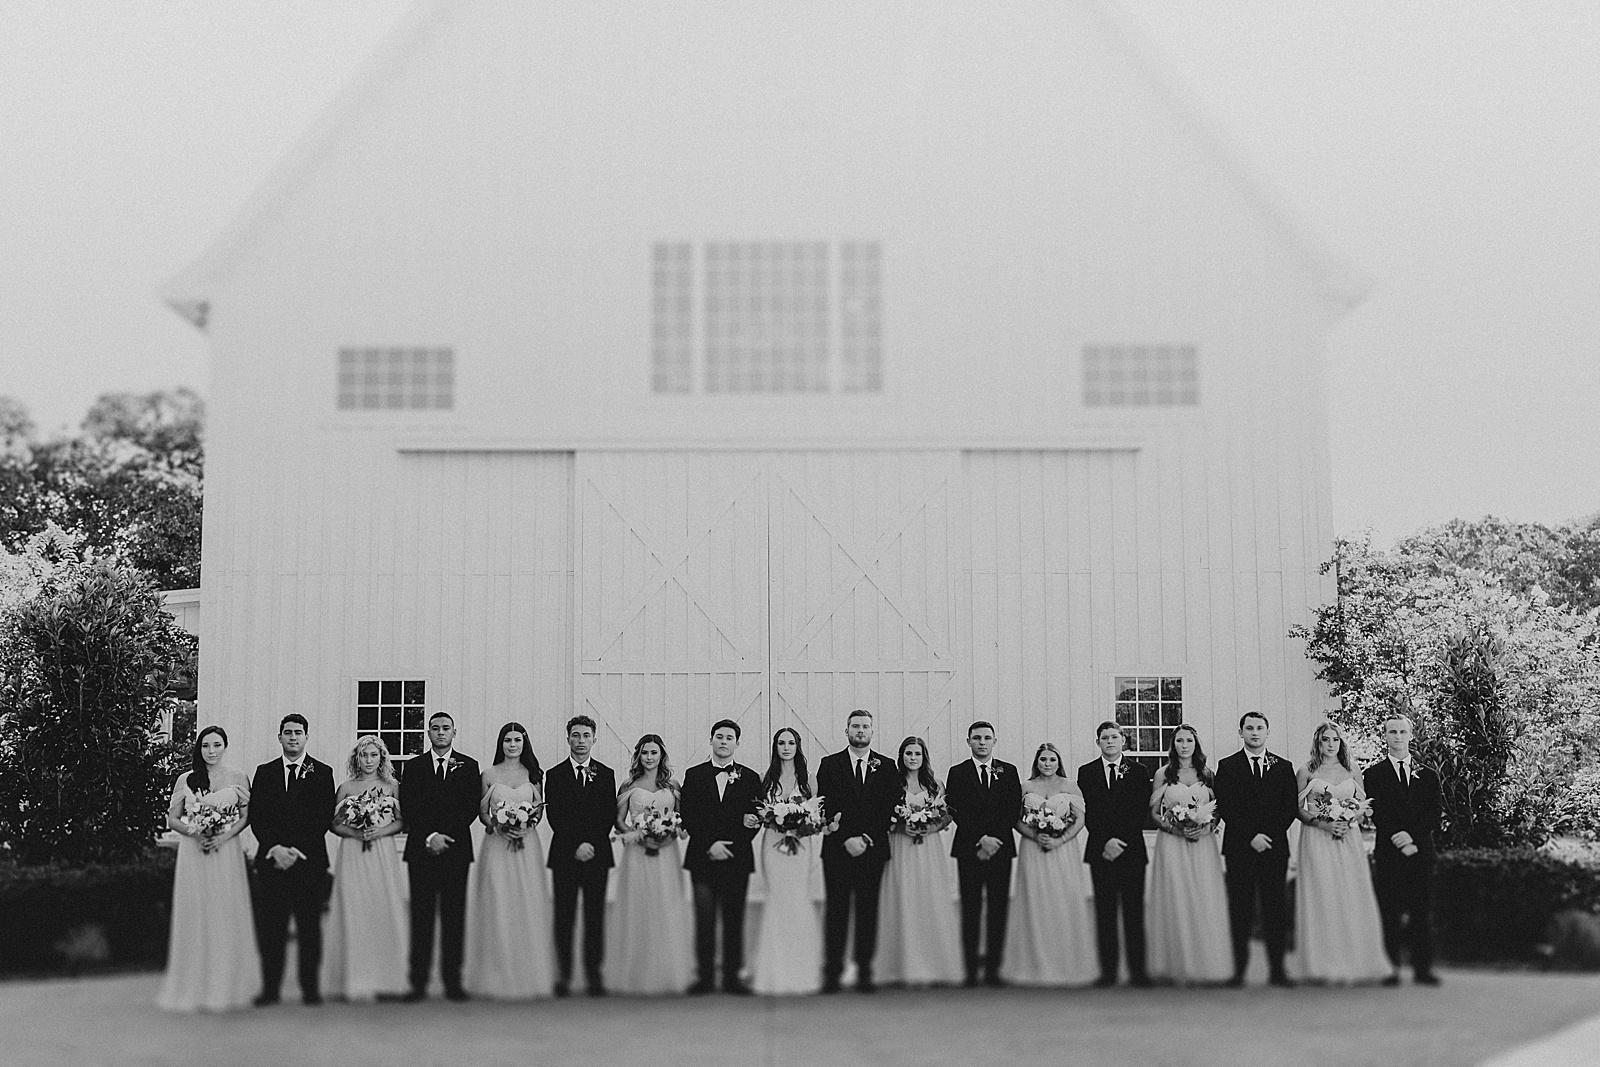 A bridal party photo at a wedding at the White Sparrow Barn in Dallas, TX. 